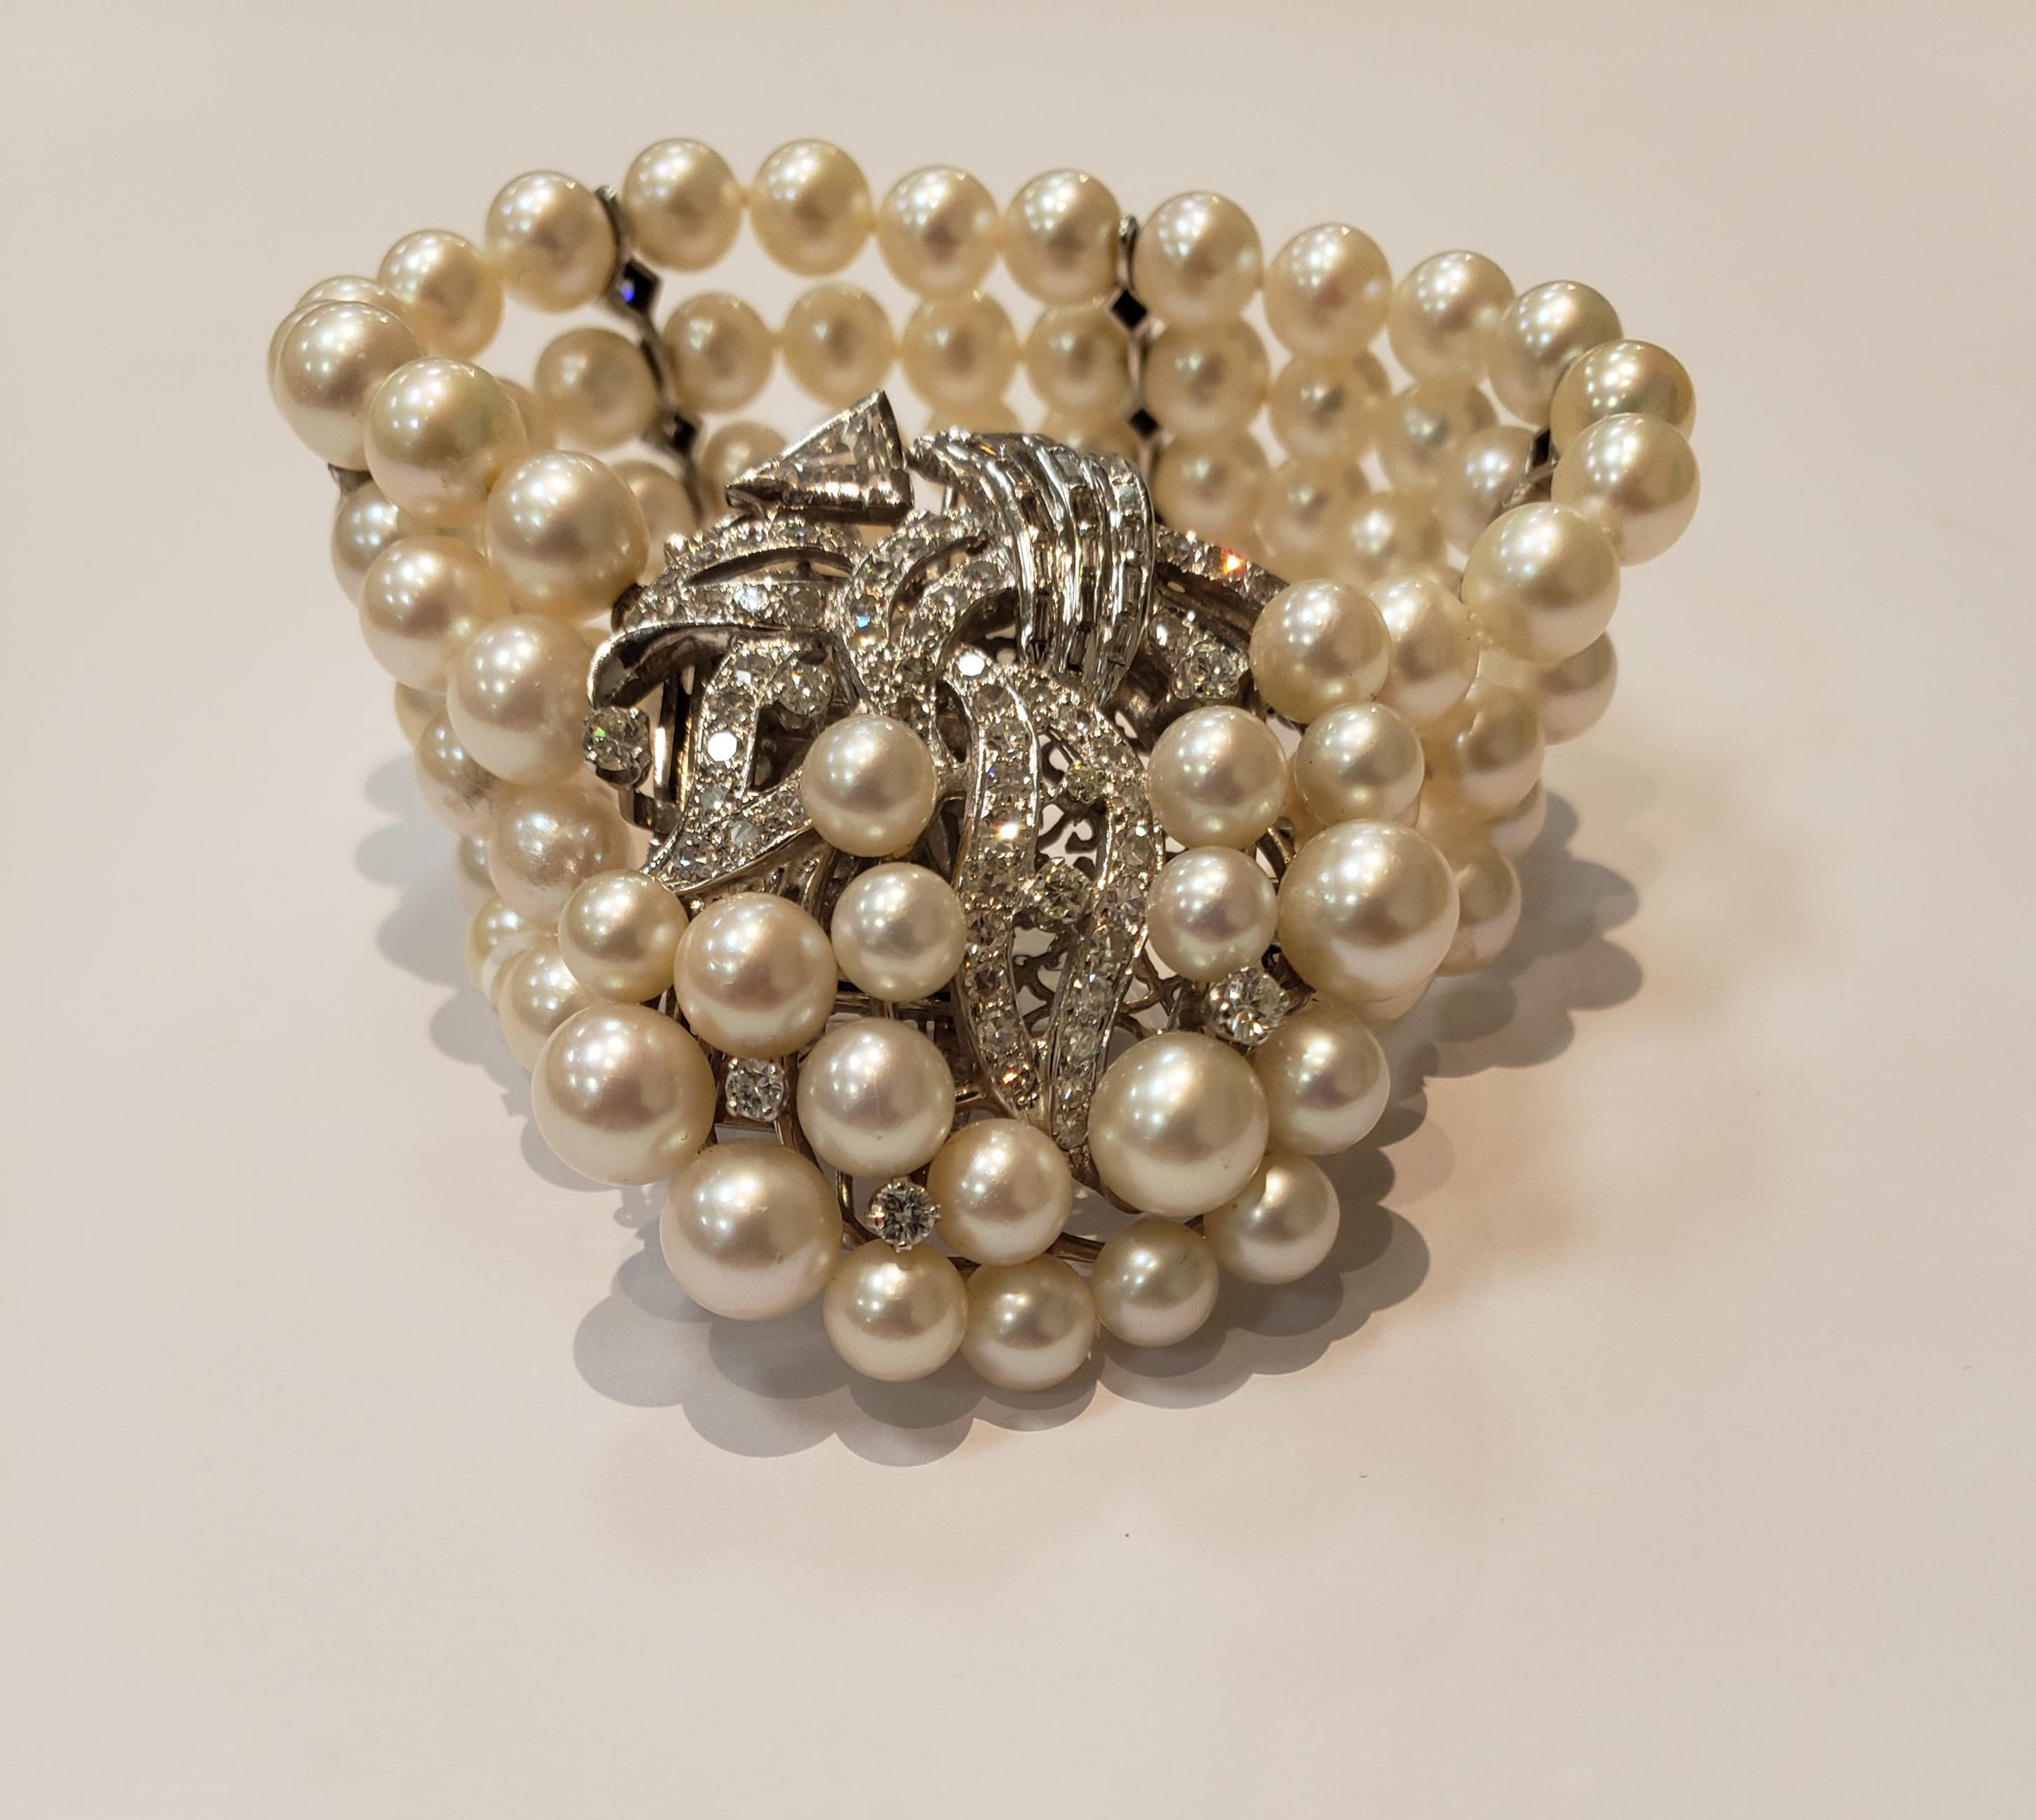 A Four Strand Pearl Bracelet With Four Spacers, Each Containing 3 Small Diamonds. Pearls are 6 Millimeters.
Clasp Has a Spray of 19 Different Size Pearls, and Assorted Diamonds, Including 56 Round, 17 Baguettes & 1 Trapezoid.
Bracelet is 6.25 Inches